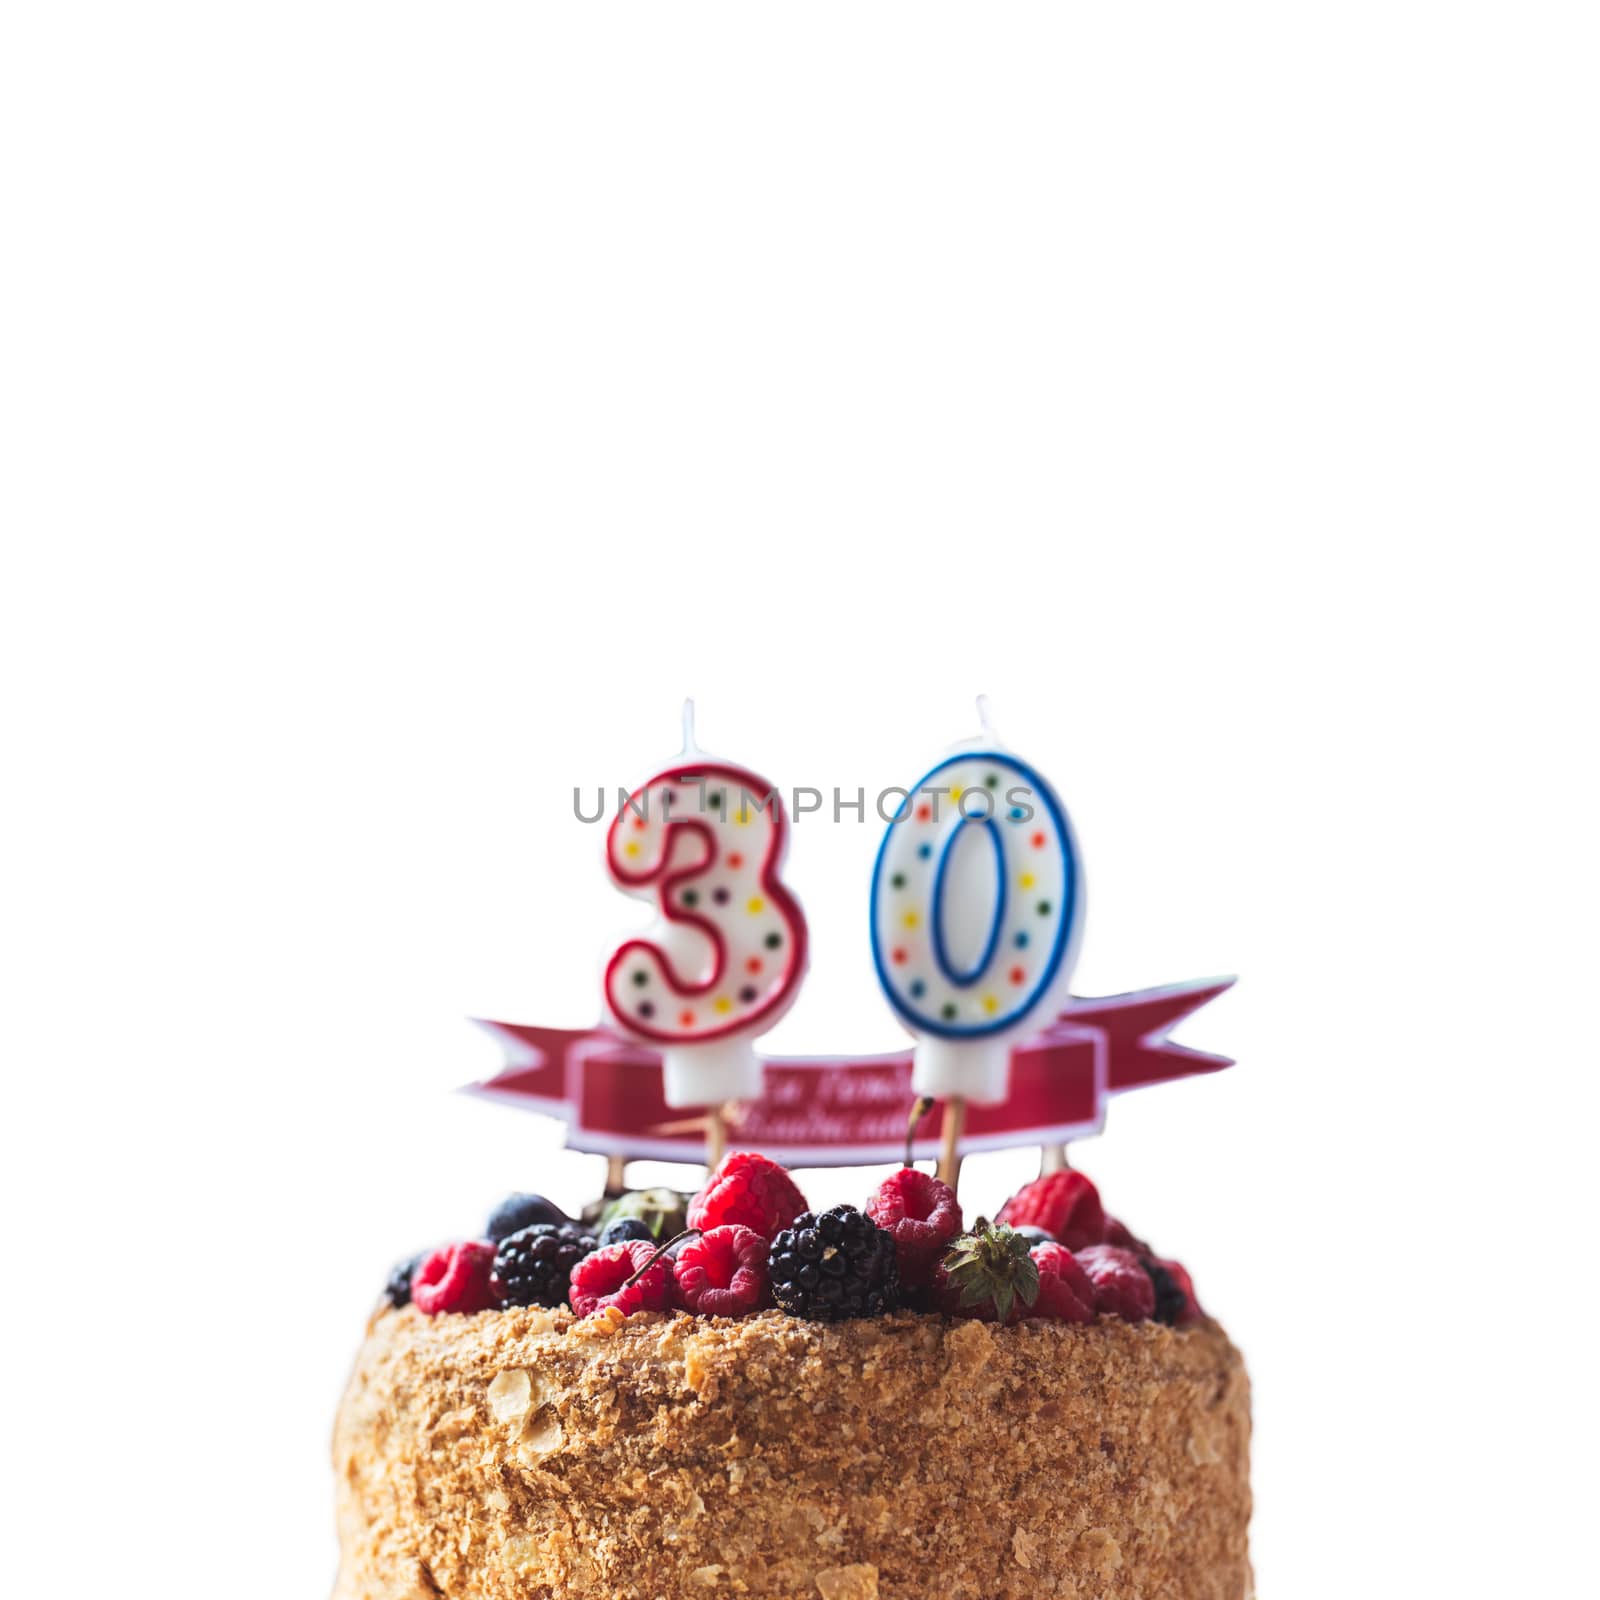 raspberries blackberry birthday cake with candles number 30 on white background and copyspace for your text by skrotov